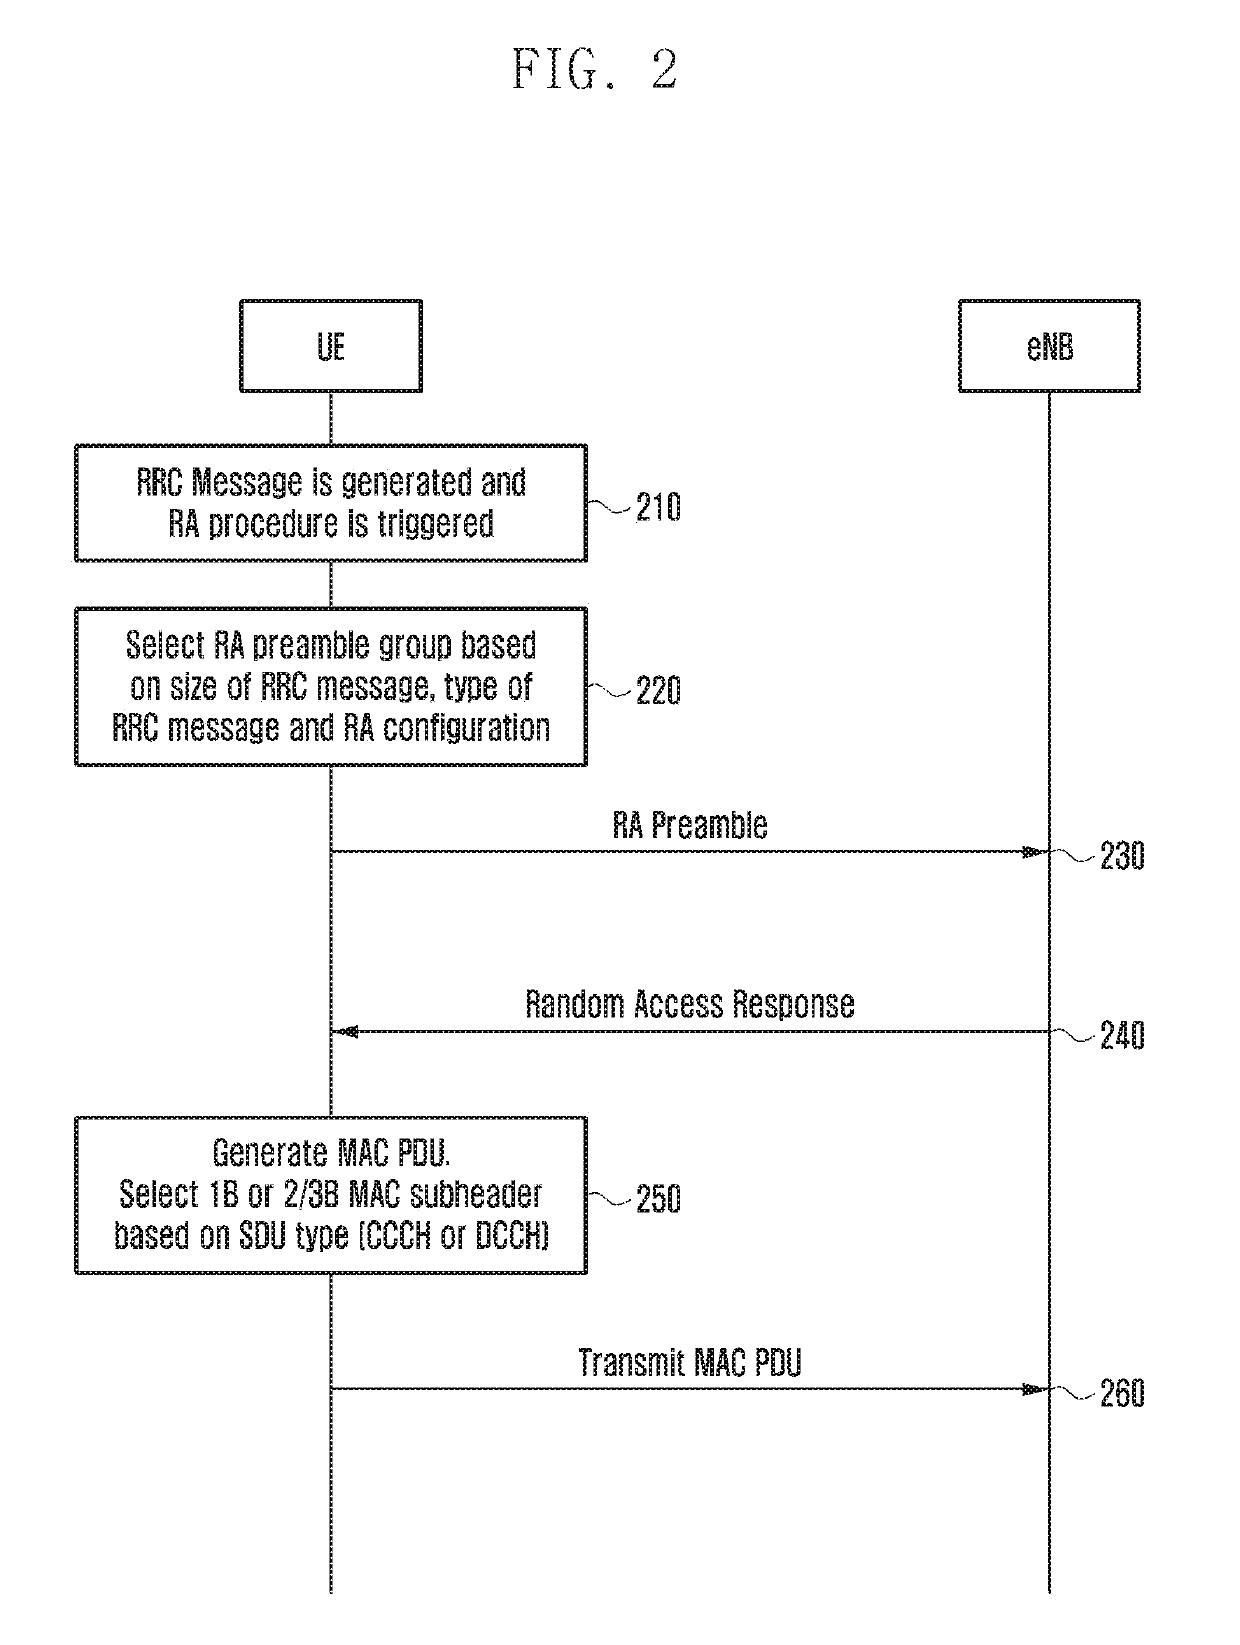 Apparatus and method of transmitting and receiving message 3 protocol data unit